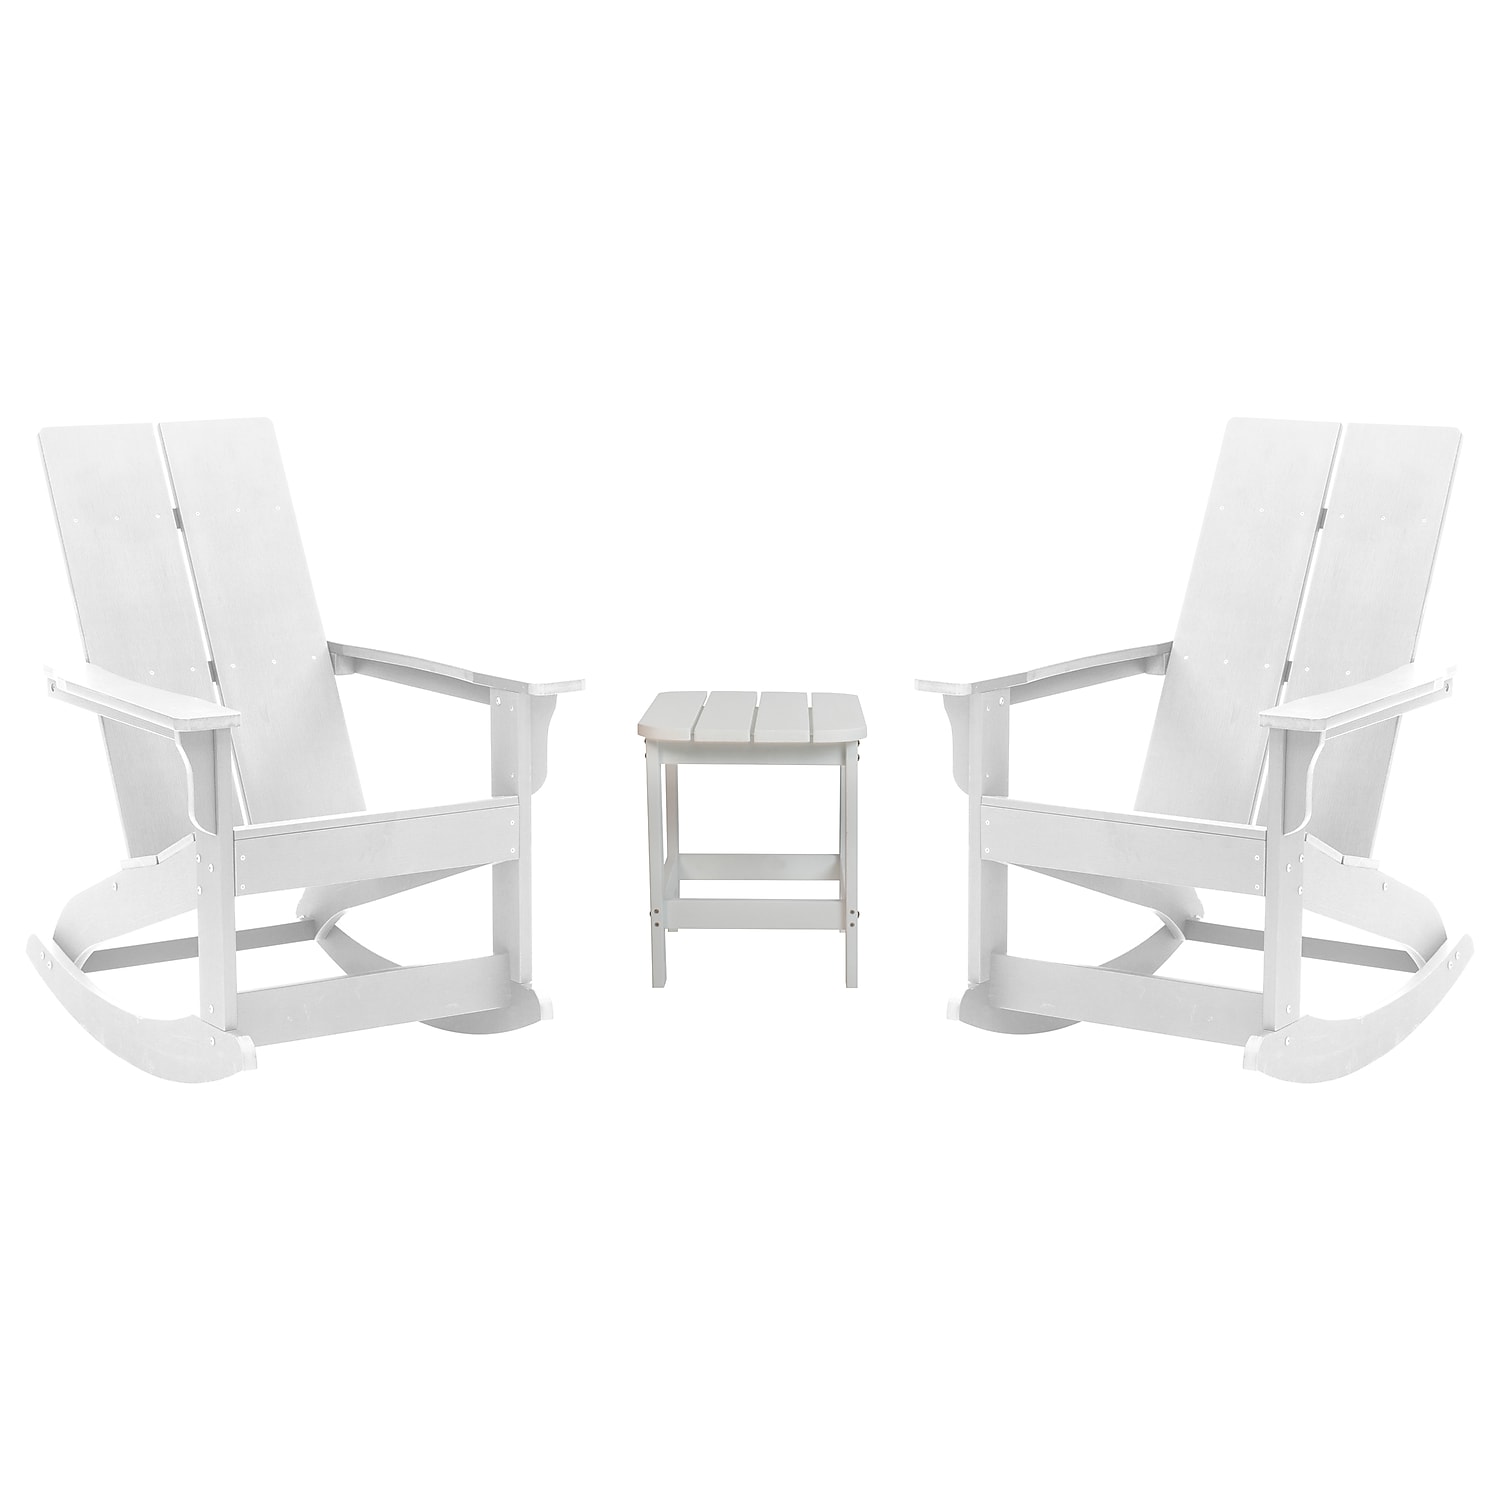 Flash Furniture Finn 3-Piece Adirondack Rocking Patio Chair and Side Table Set, White - image 1 of 9